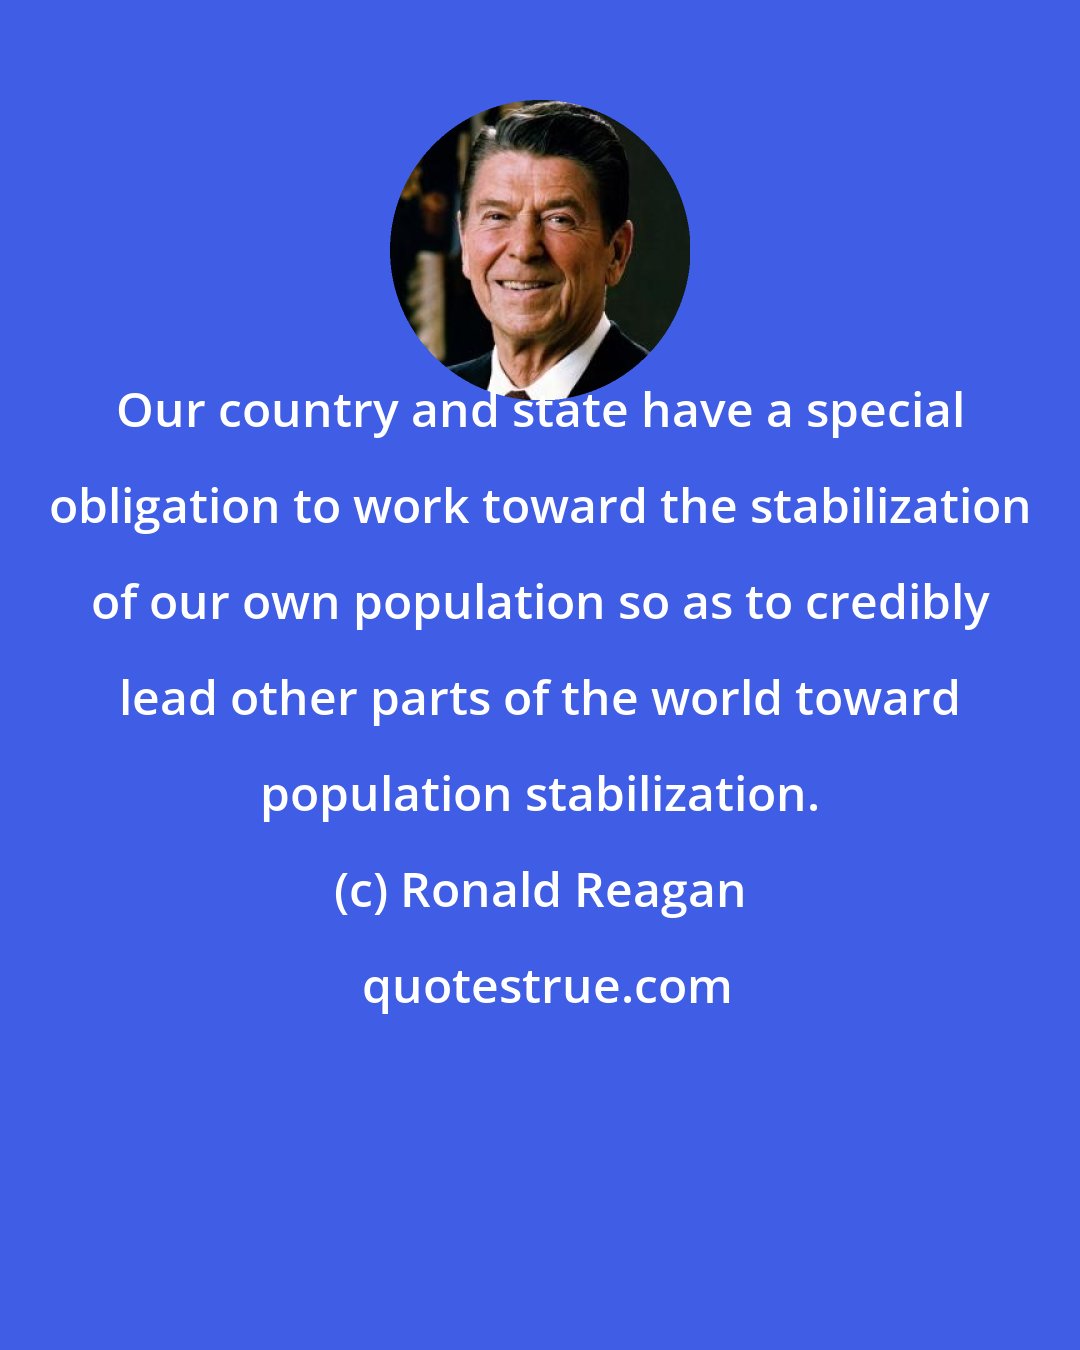 Ronald Reagan: Our country and state have a special obligation to work toward the stabilization of our own population so as to credibly lead other parts of the world toward population stabilization.